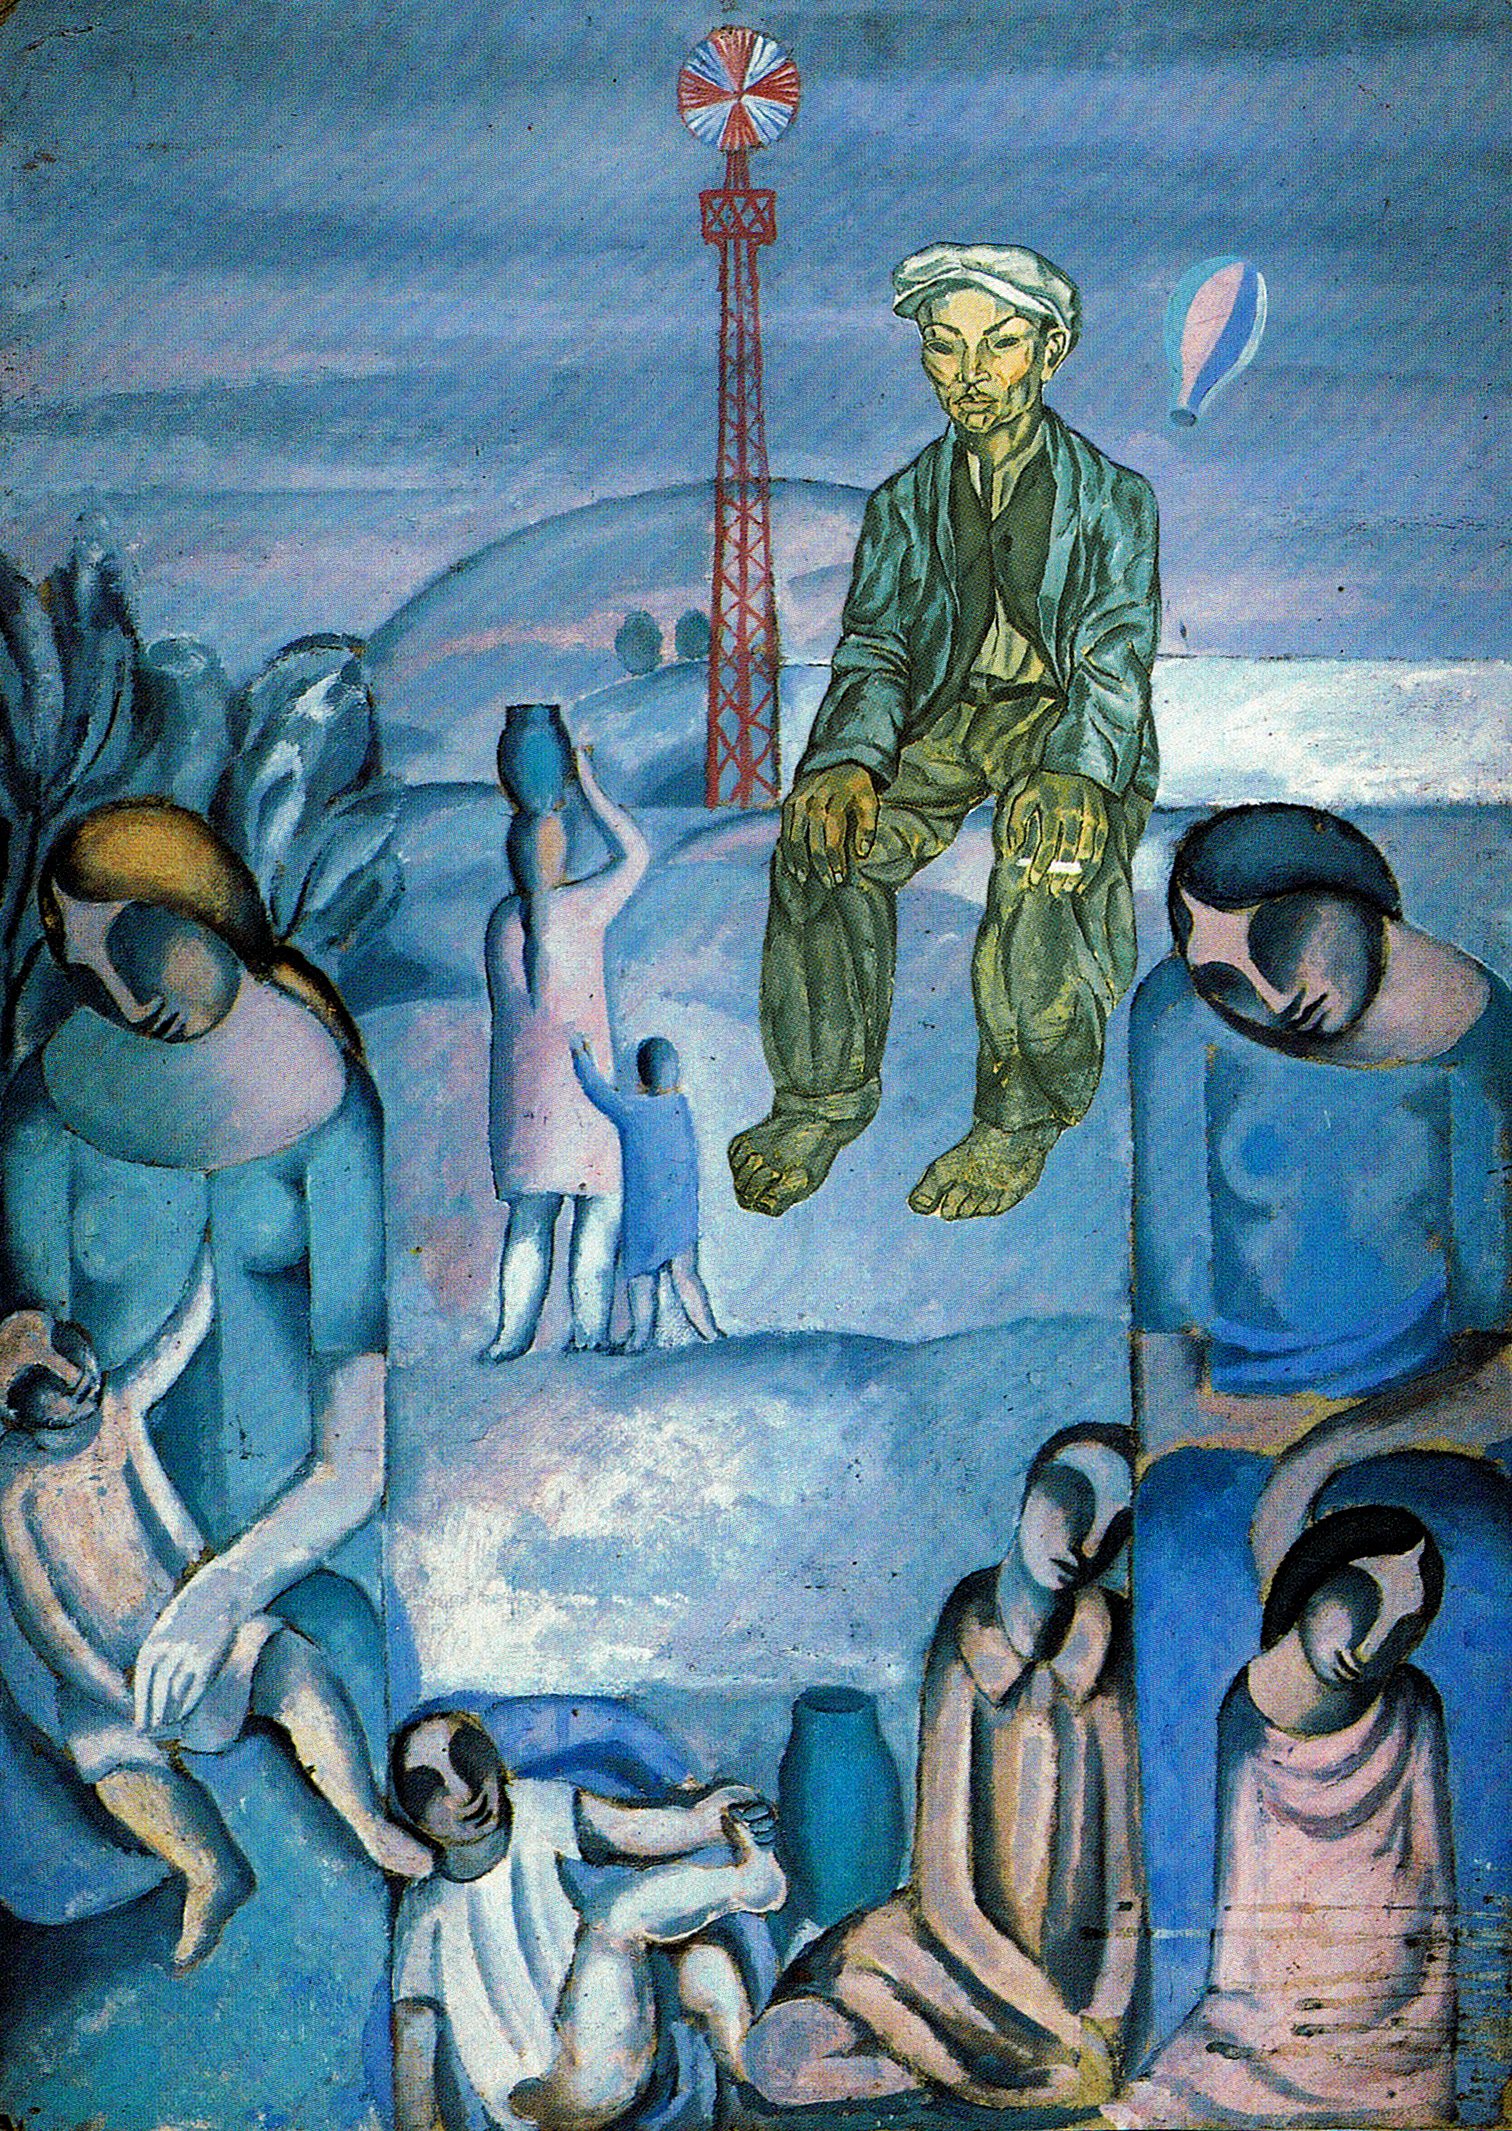 an artistic painting showing people and a tower